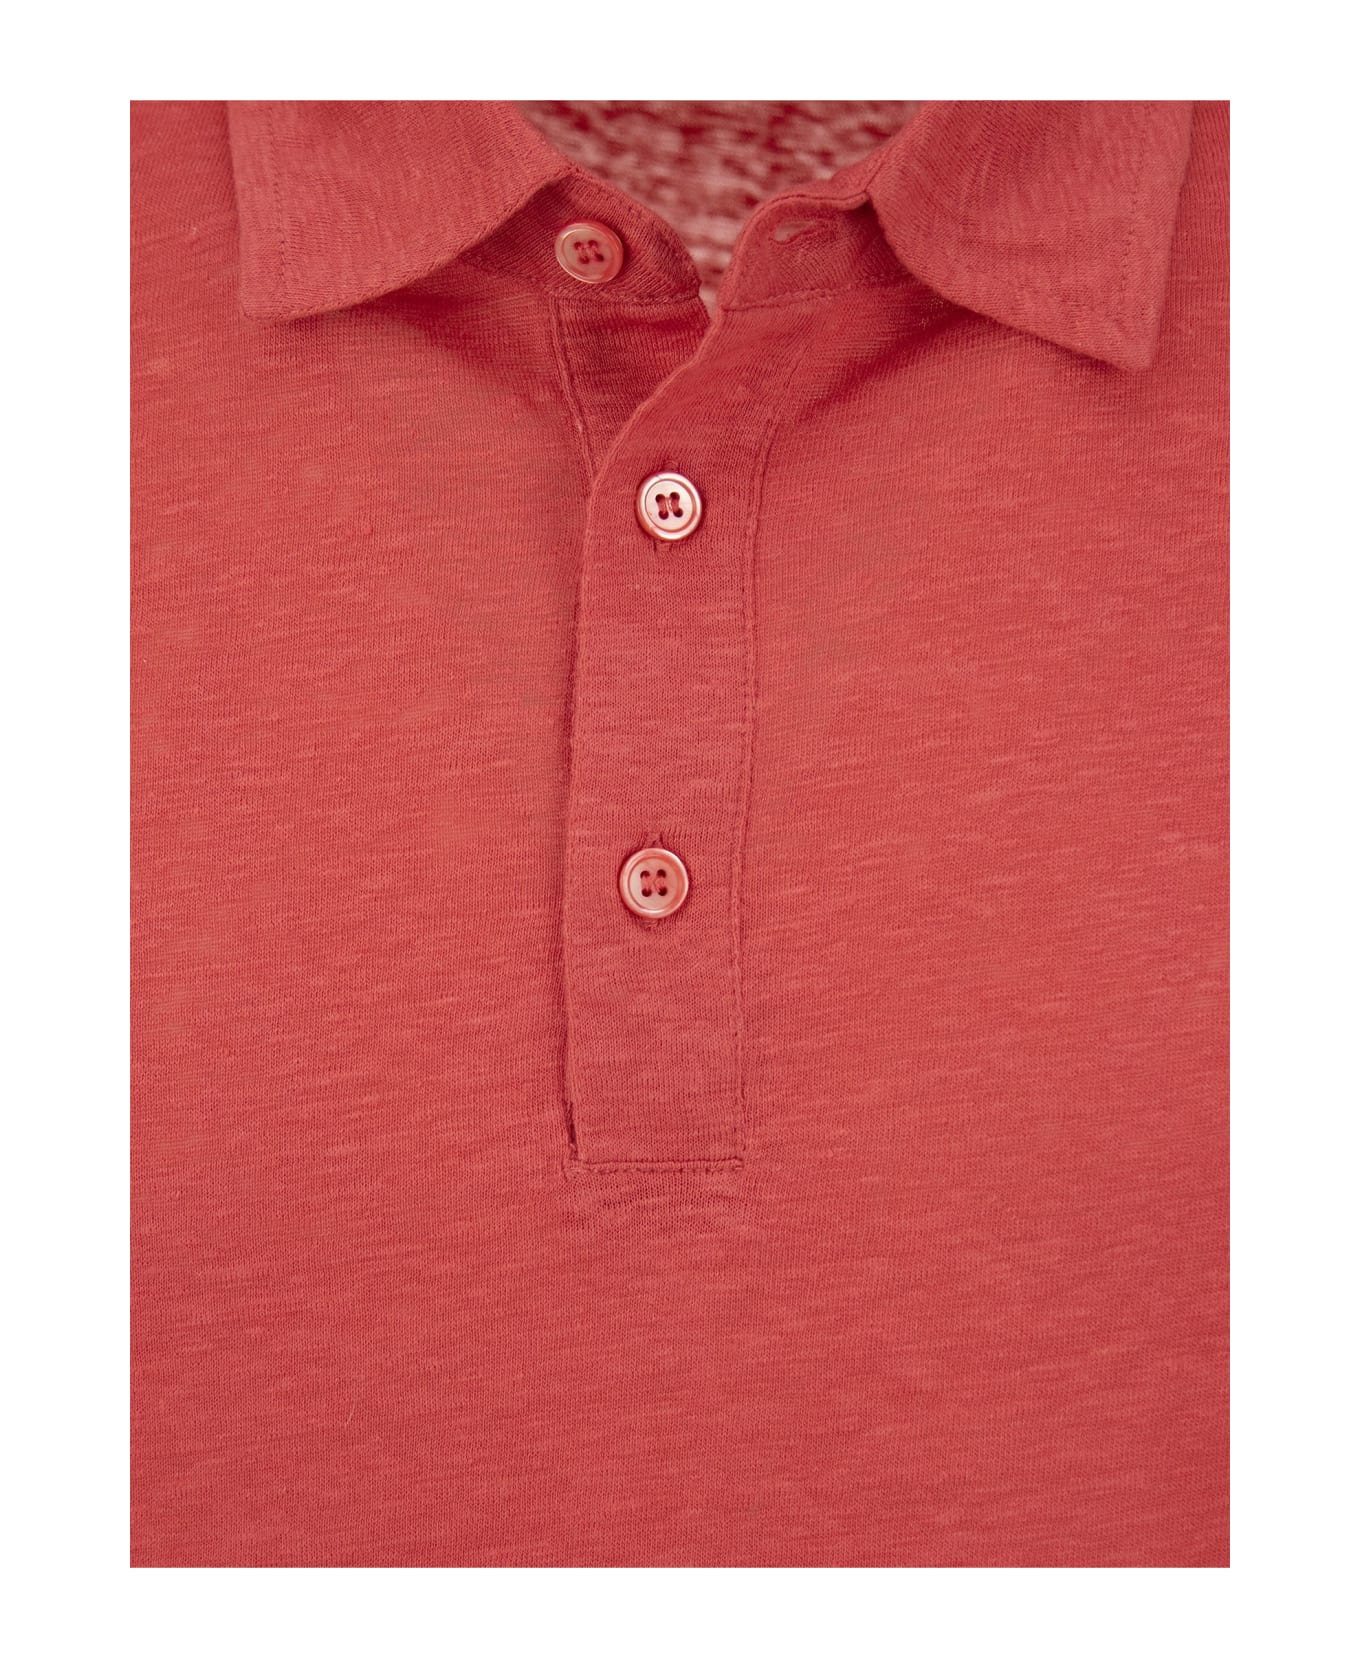 Majestic Filatures Linen Polo Shirt With Buttons - Red